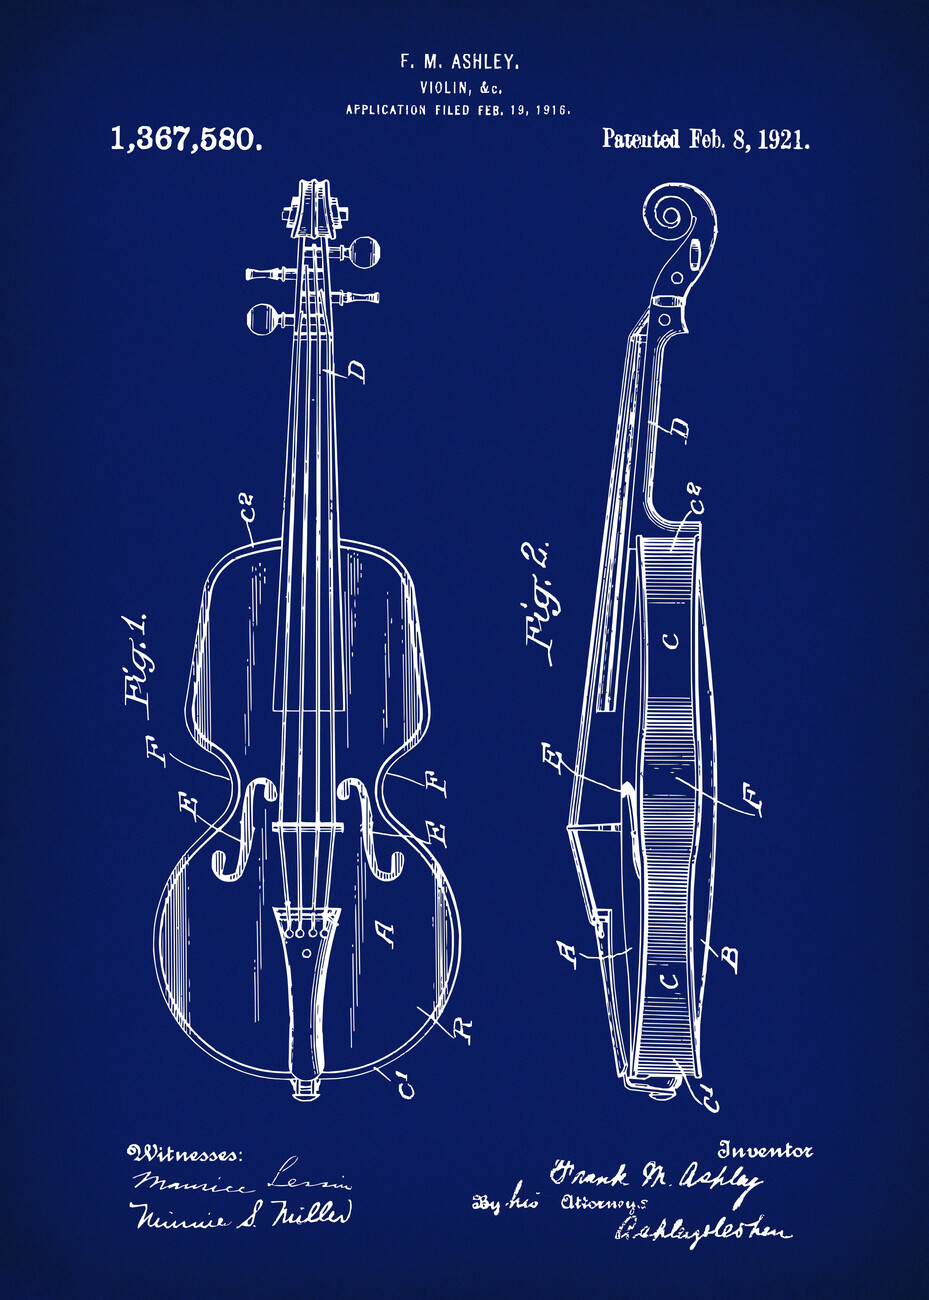 Wall Art | Violin Patent, was invented on 1921. | Europosters